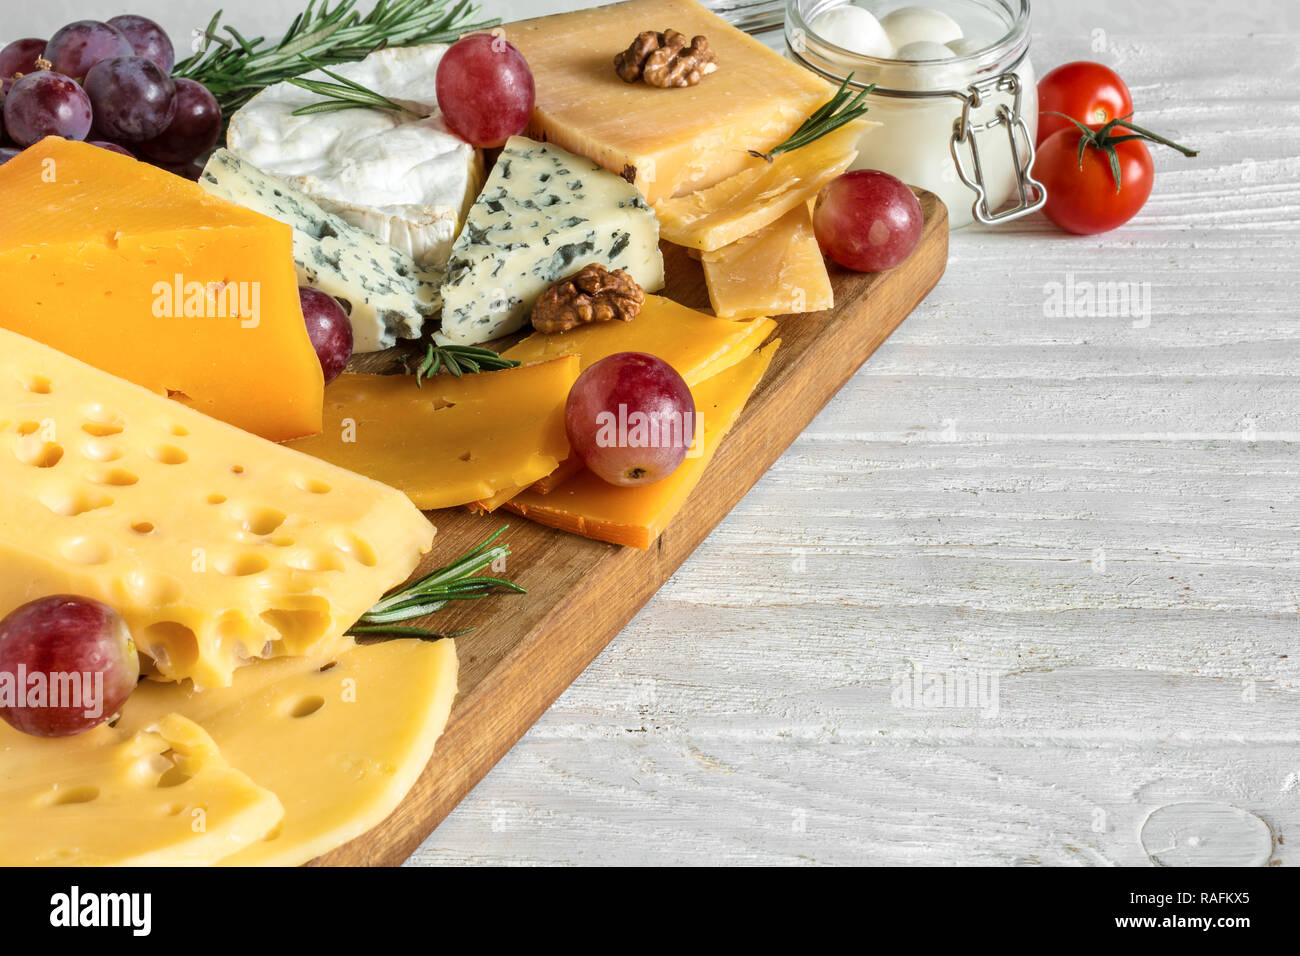 different types of cheeses on wooden cutting board. Camembert cheese, cheddar, hard cheese slices, soft cheese, walnuts, grapes, tomatoes and rosemary Stock Photo